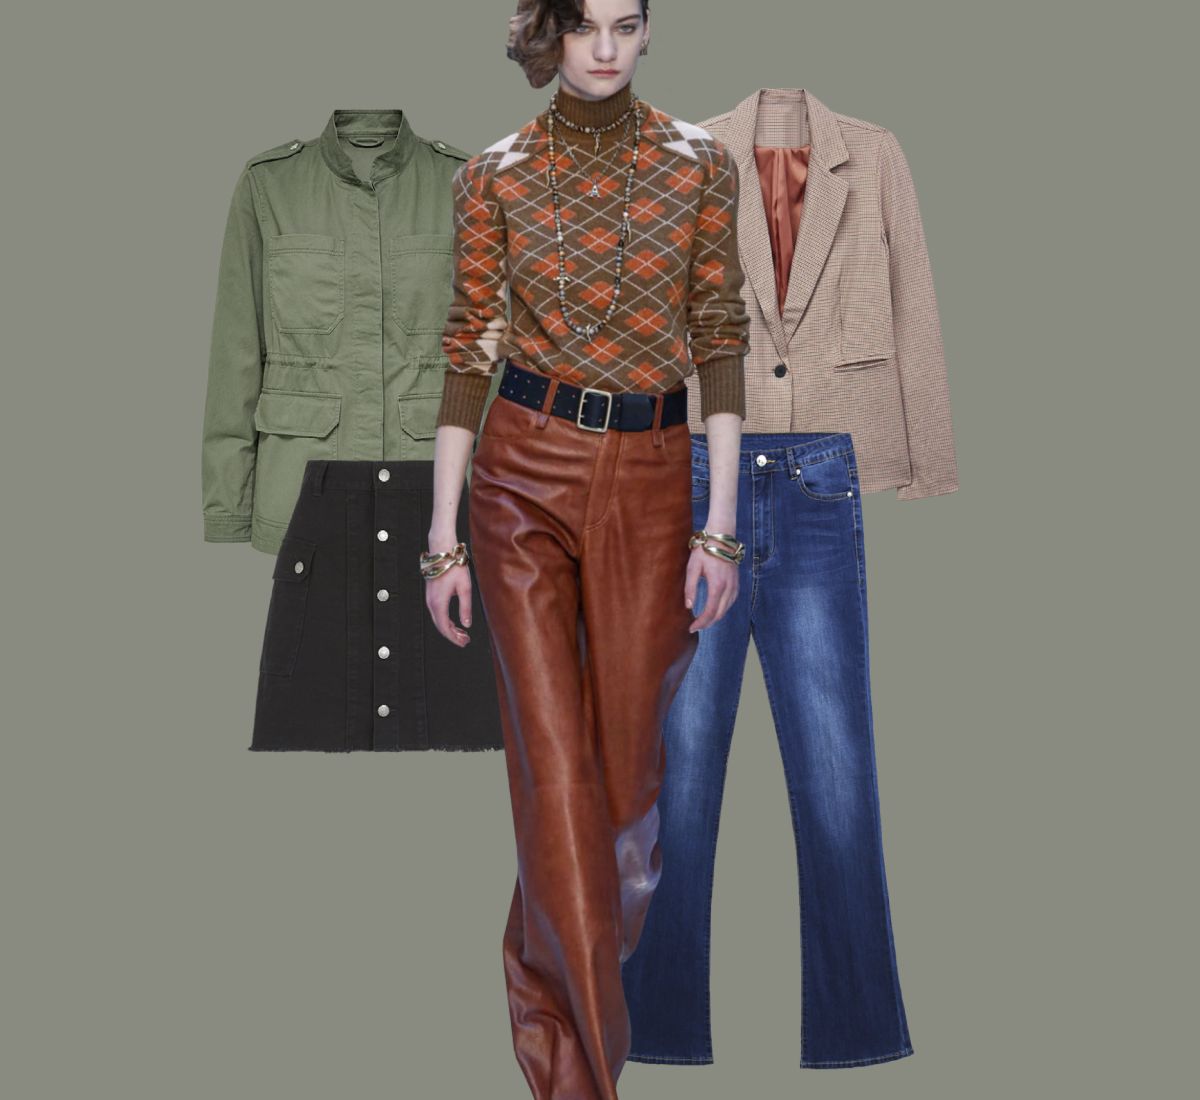 70s style clothing for summer and Autumn - Vintage Blog